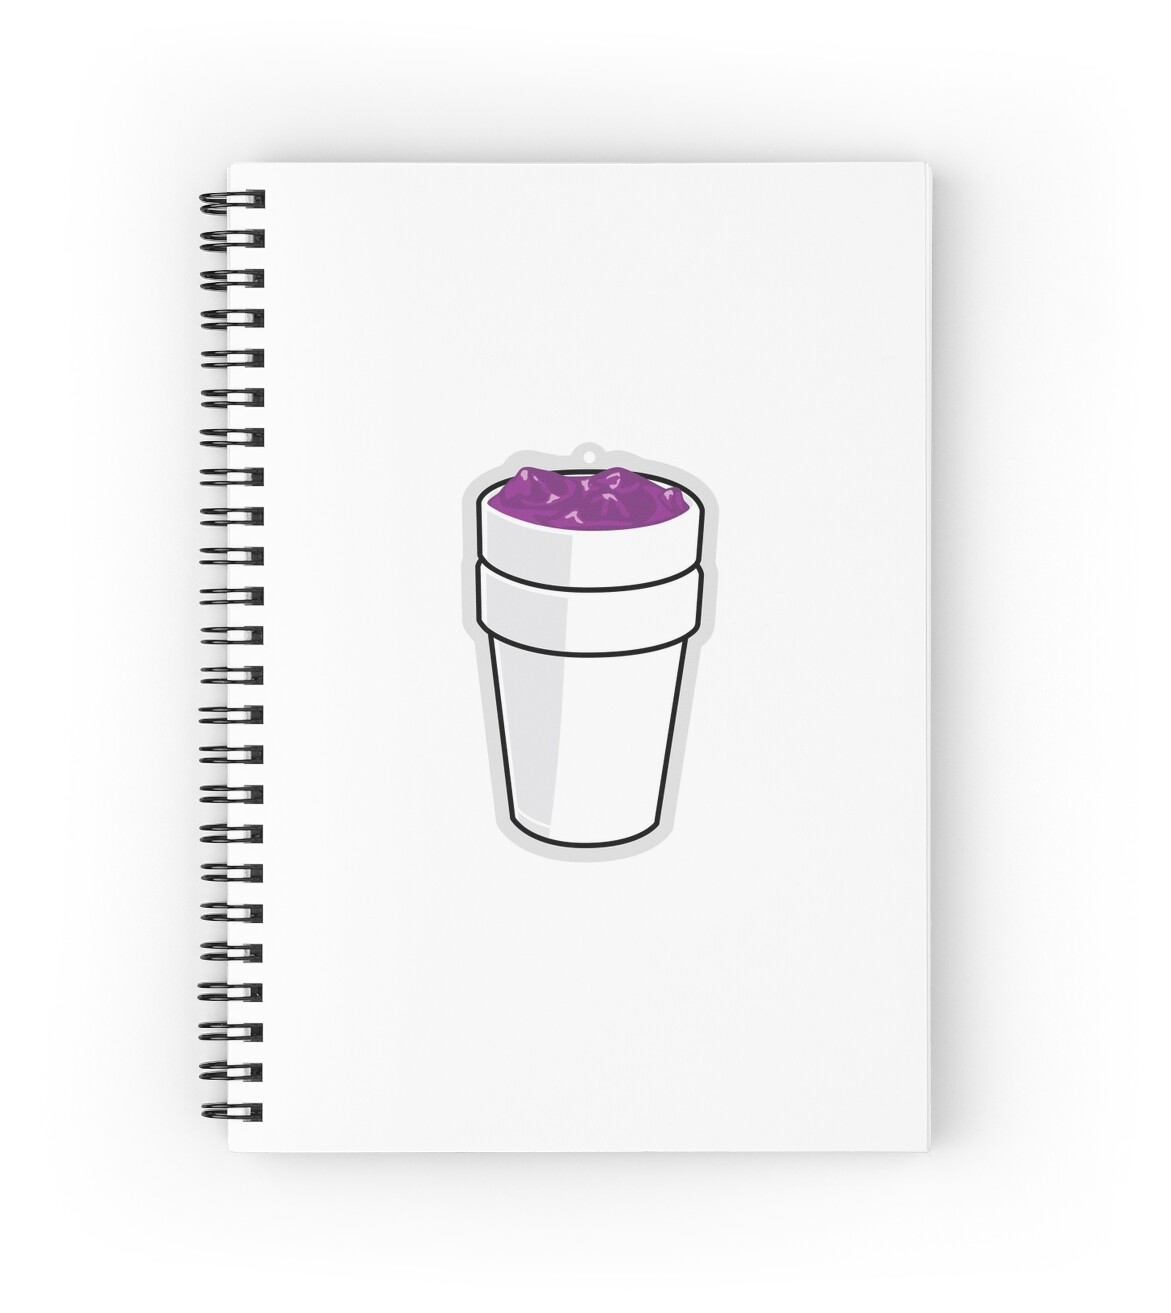 "Cartoon Lean Cup" Spiral Notebooks by Bryce Cotton | Redbubble